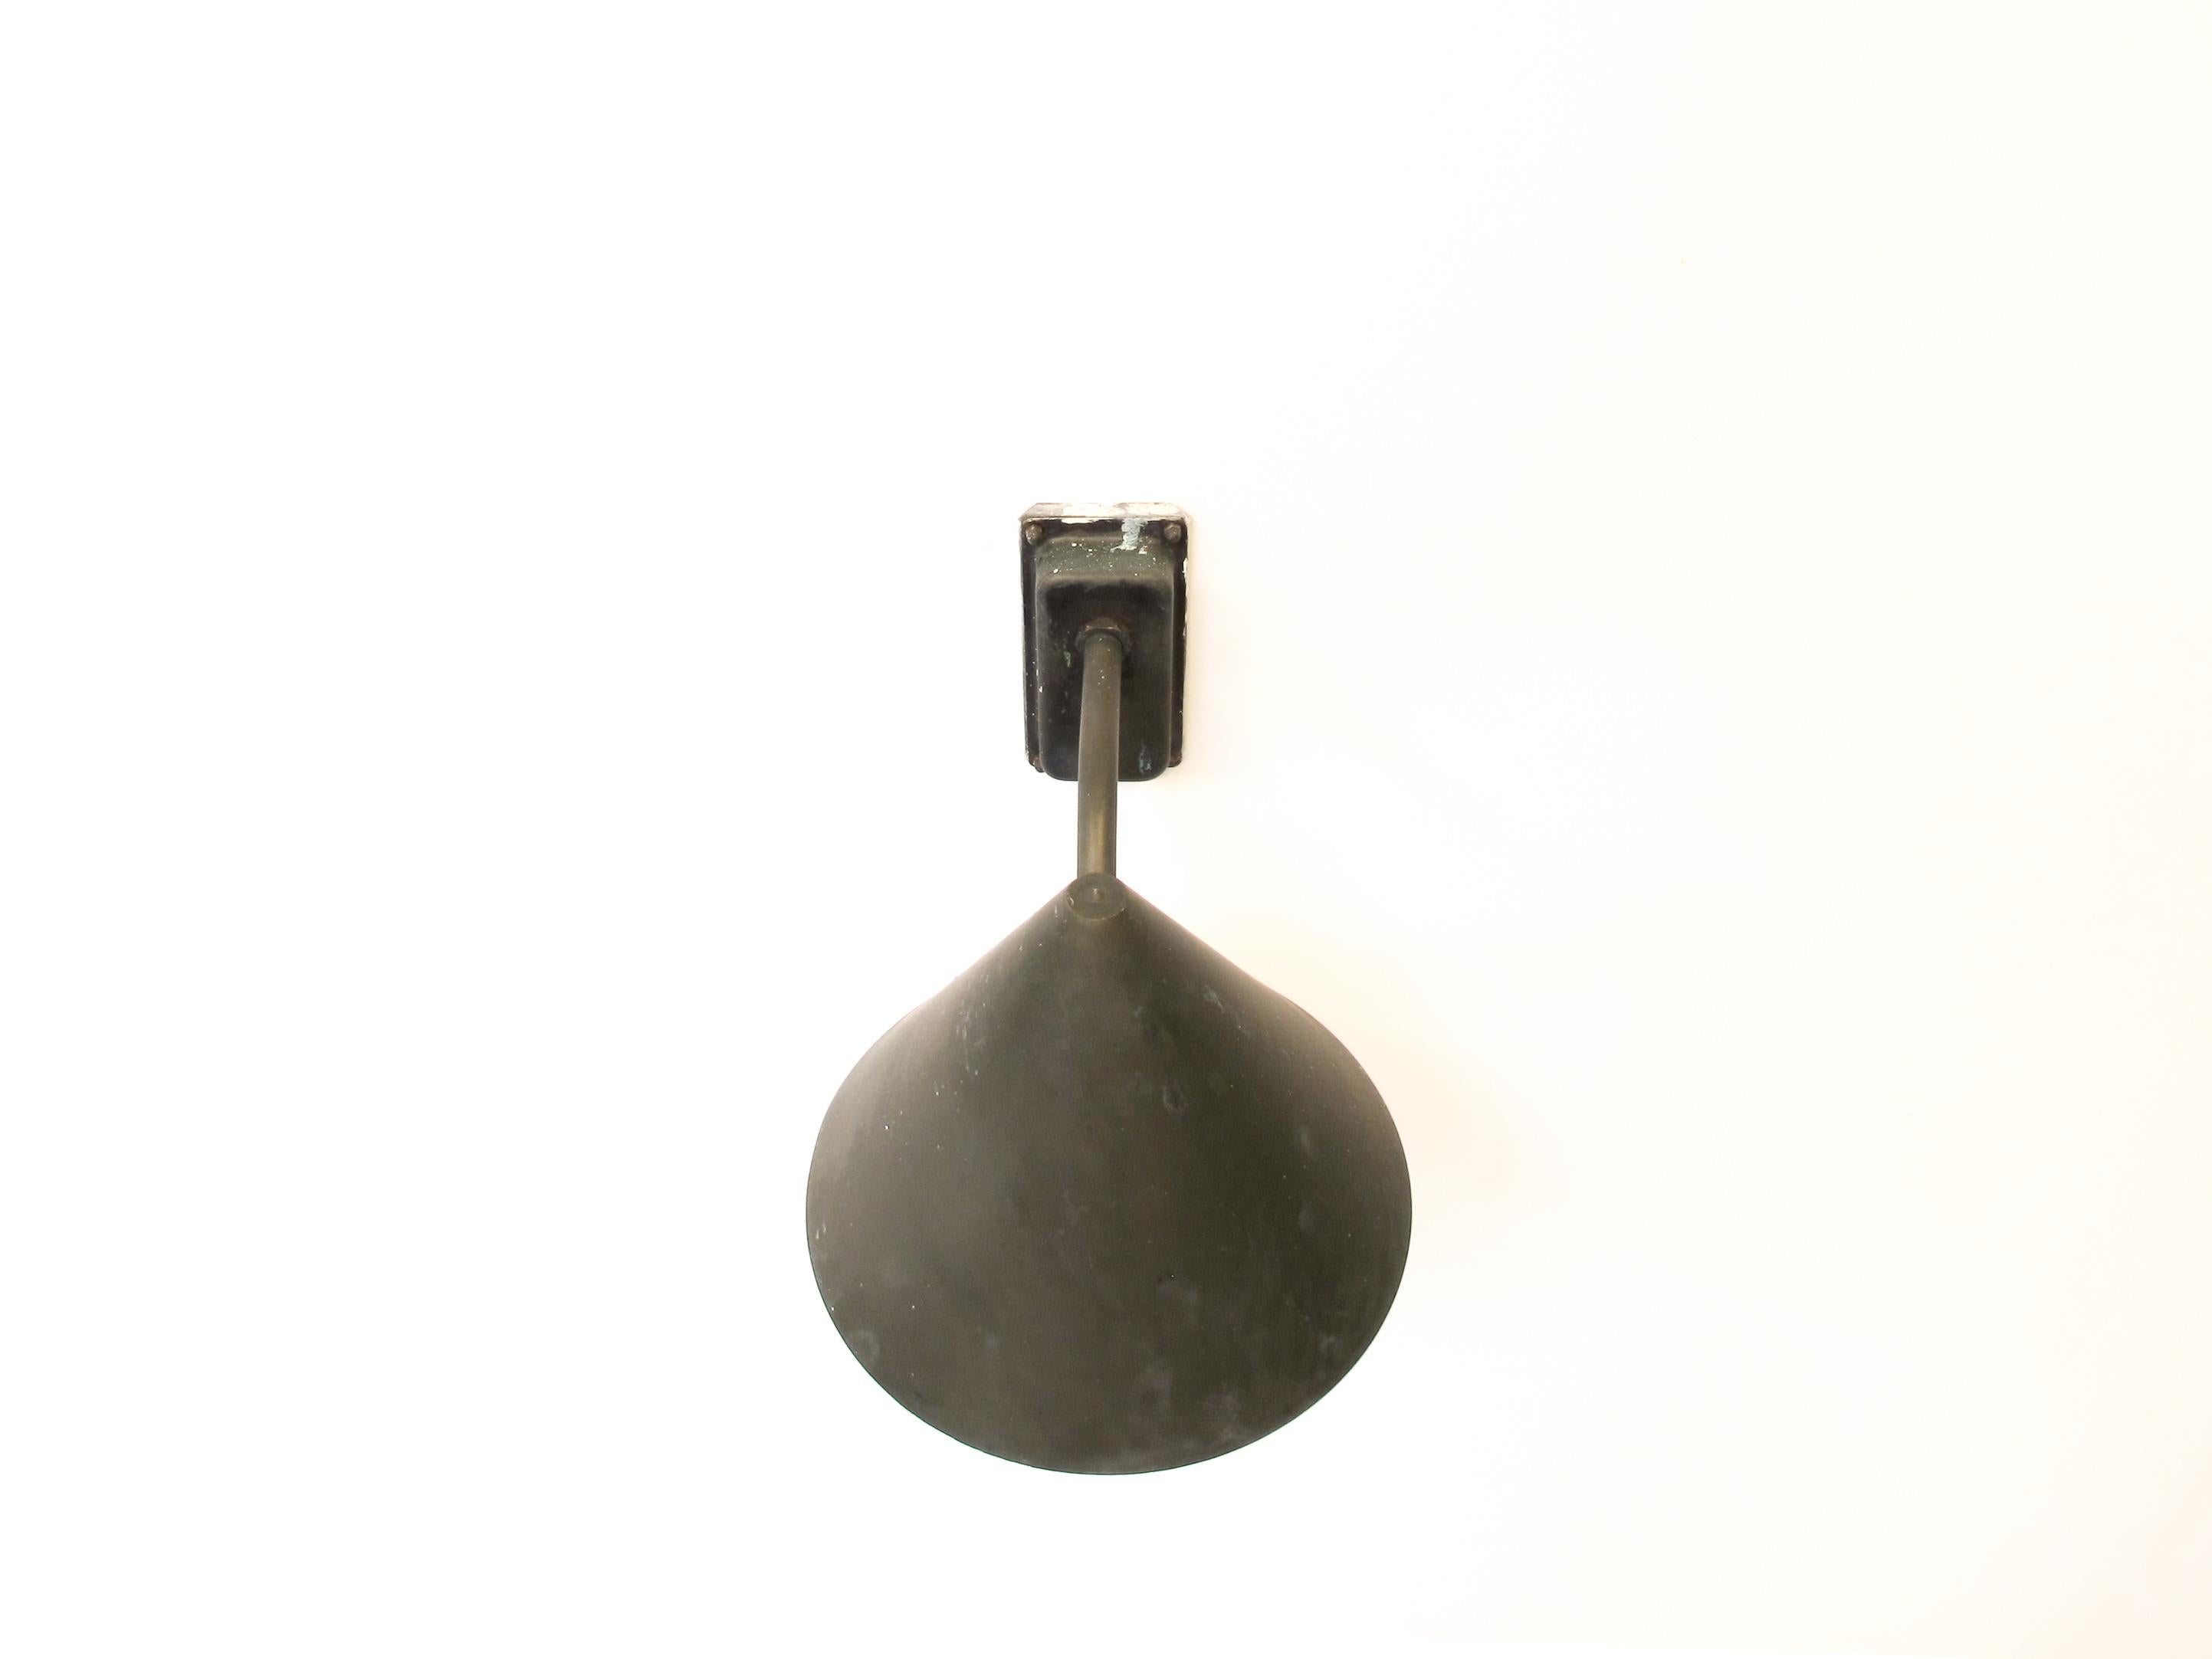 Hans-Agne Jakobsson 'Tratten' patinated copper outdoor sconce. 
Wires are cut but can be rewired by professional 3rd hand party for an additional fee. 
White lacquered inside of the scone.